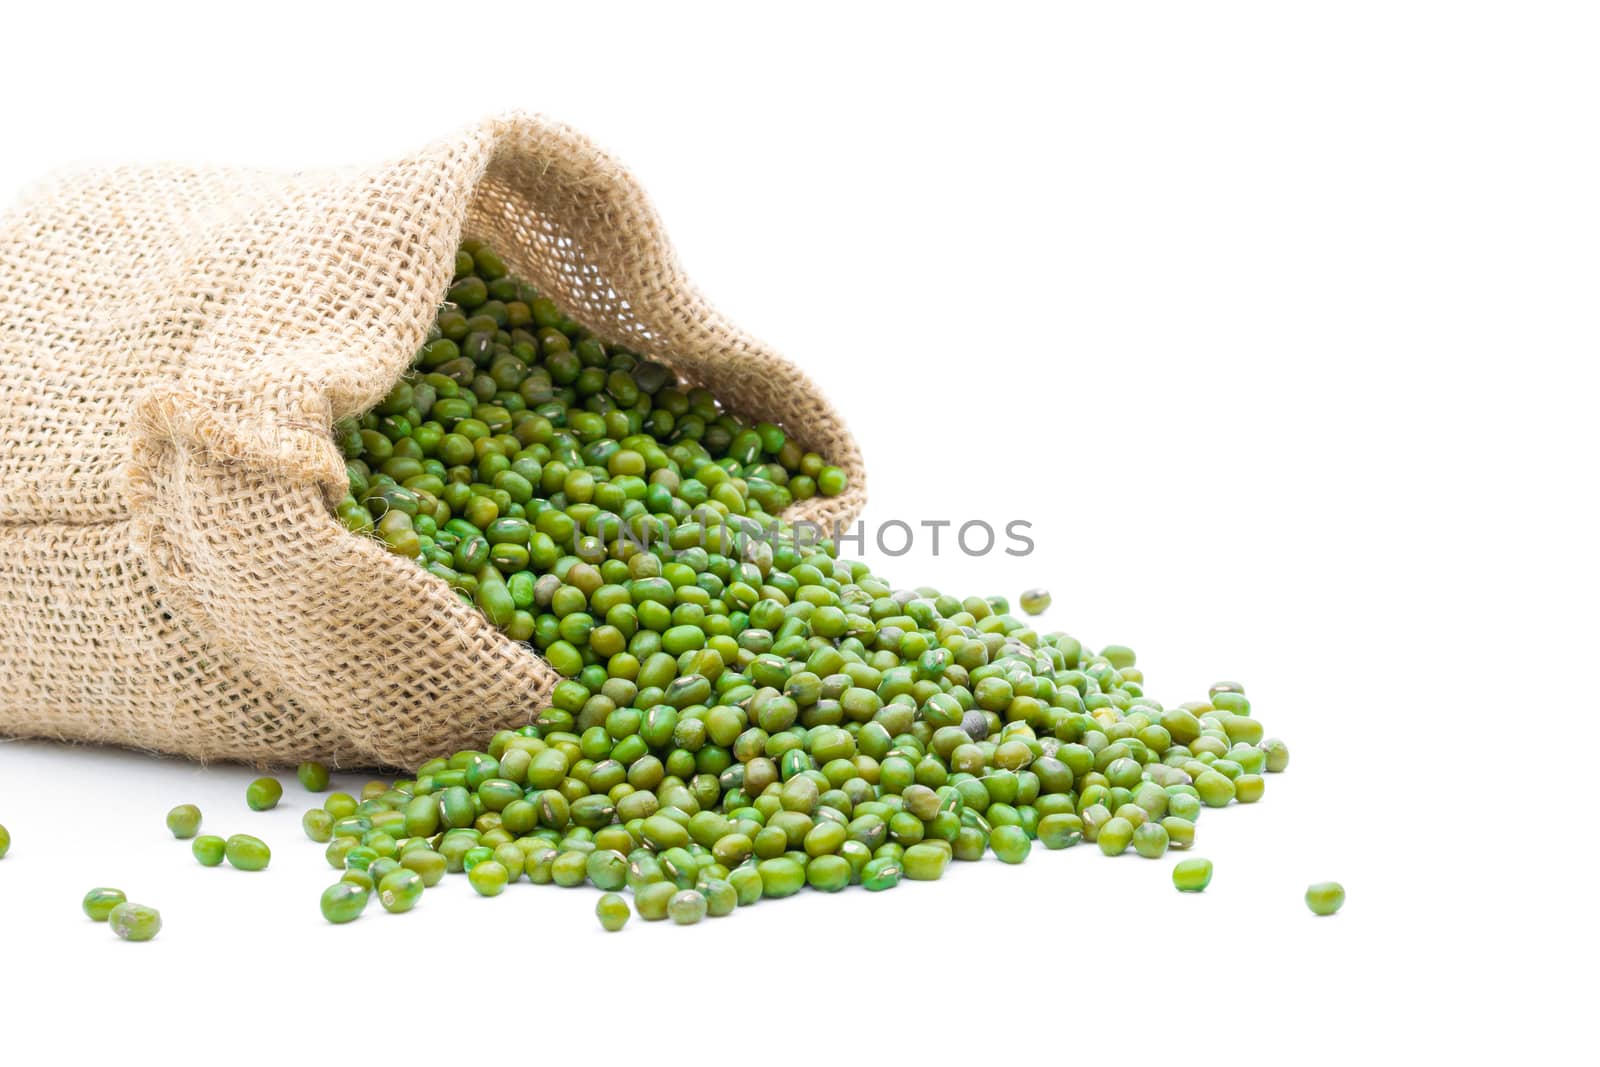 Grains Mung bean in a sack on a white background